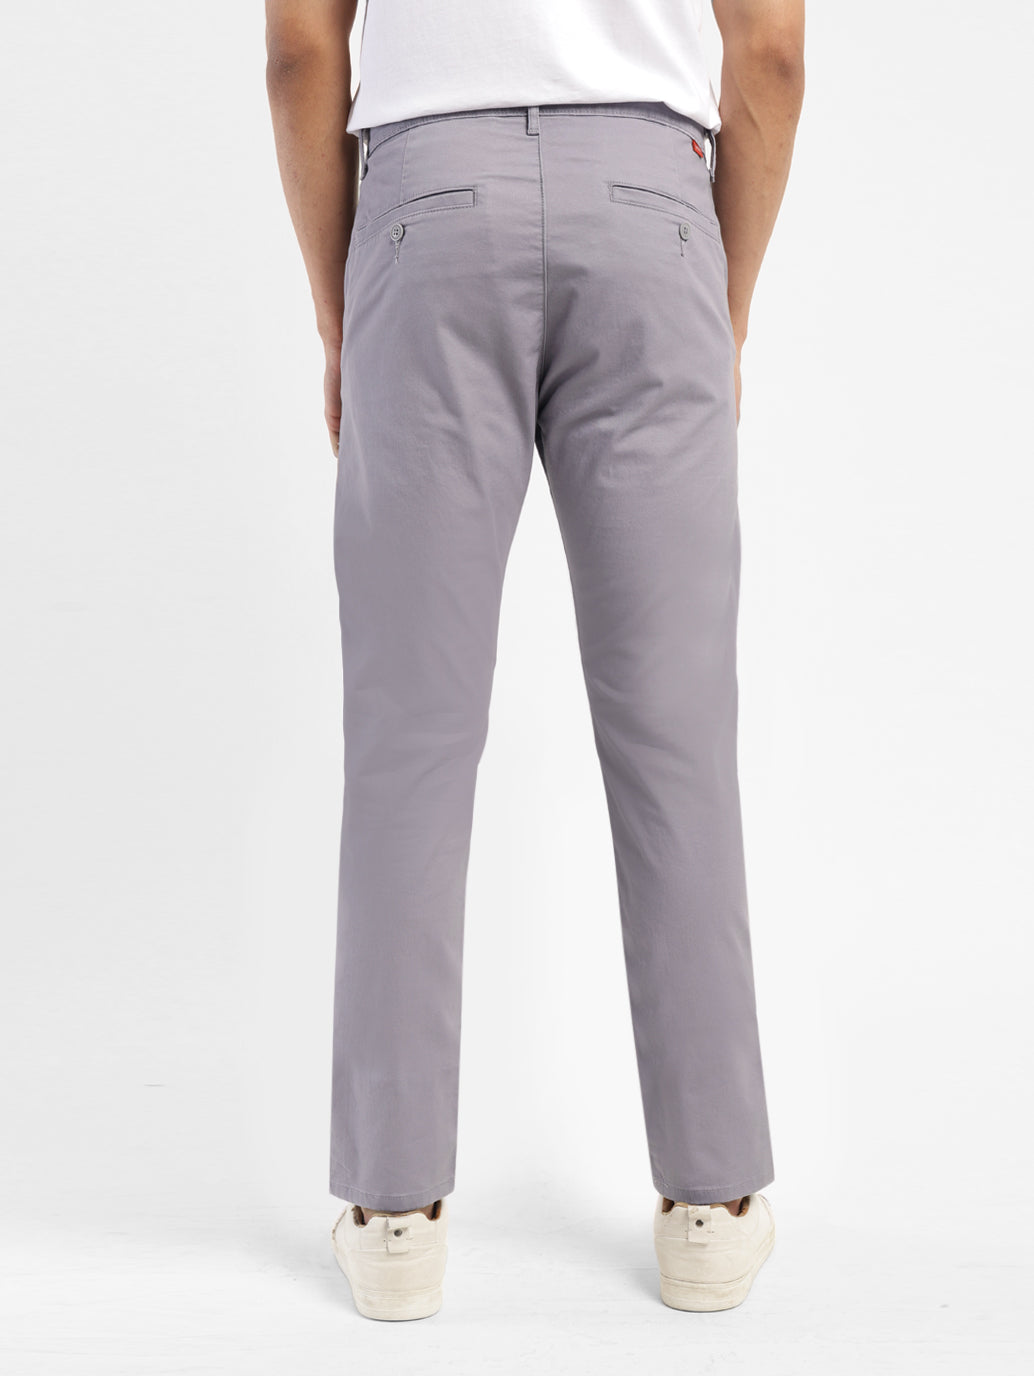 Men's 512 Grey Slim Tapered Fit Chinos